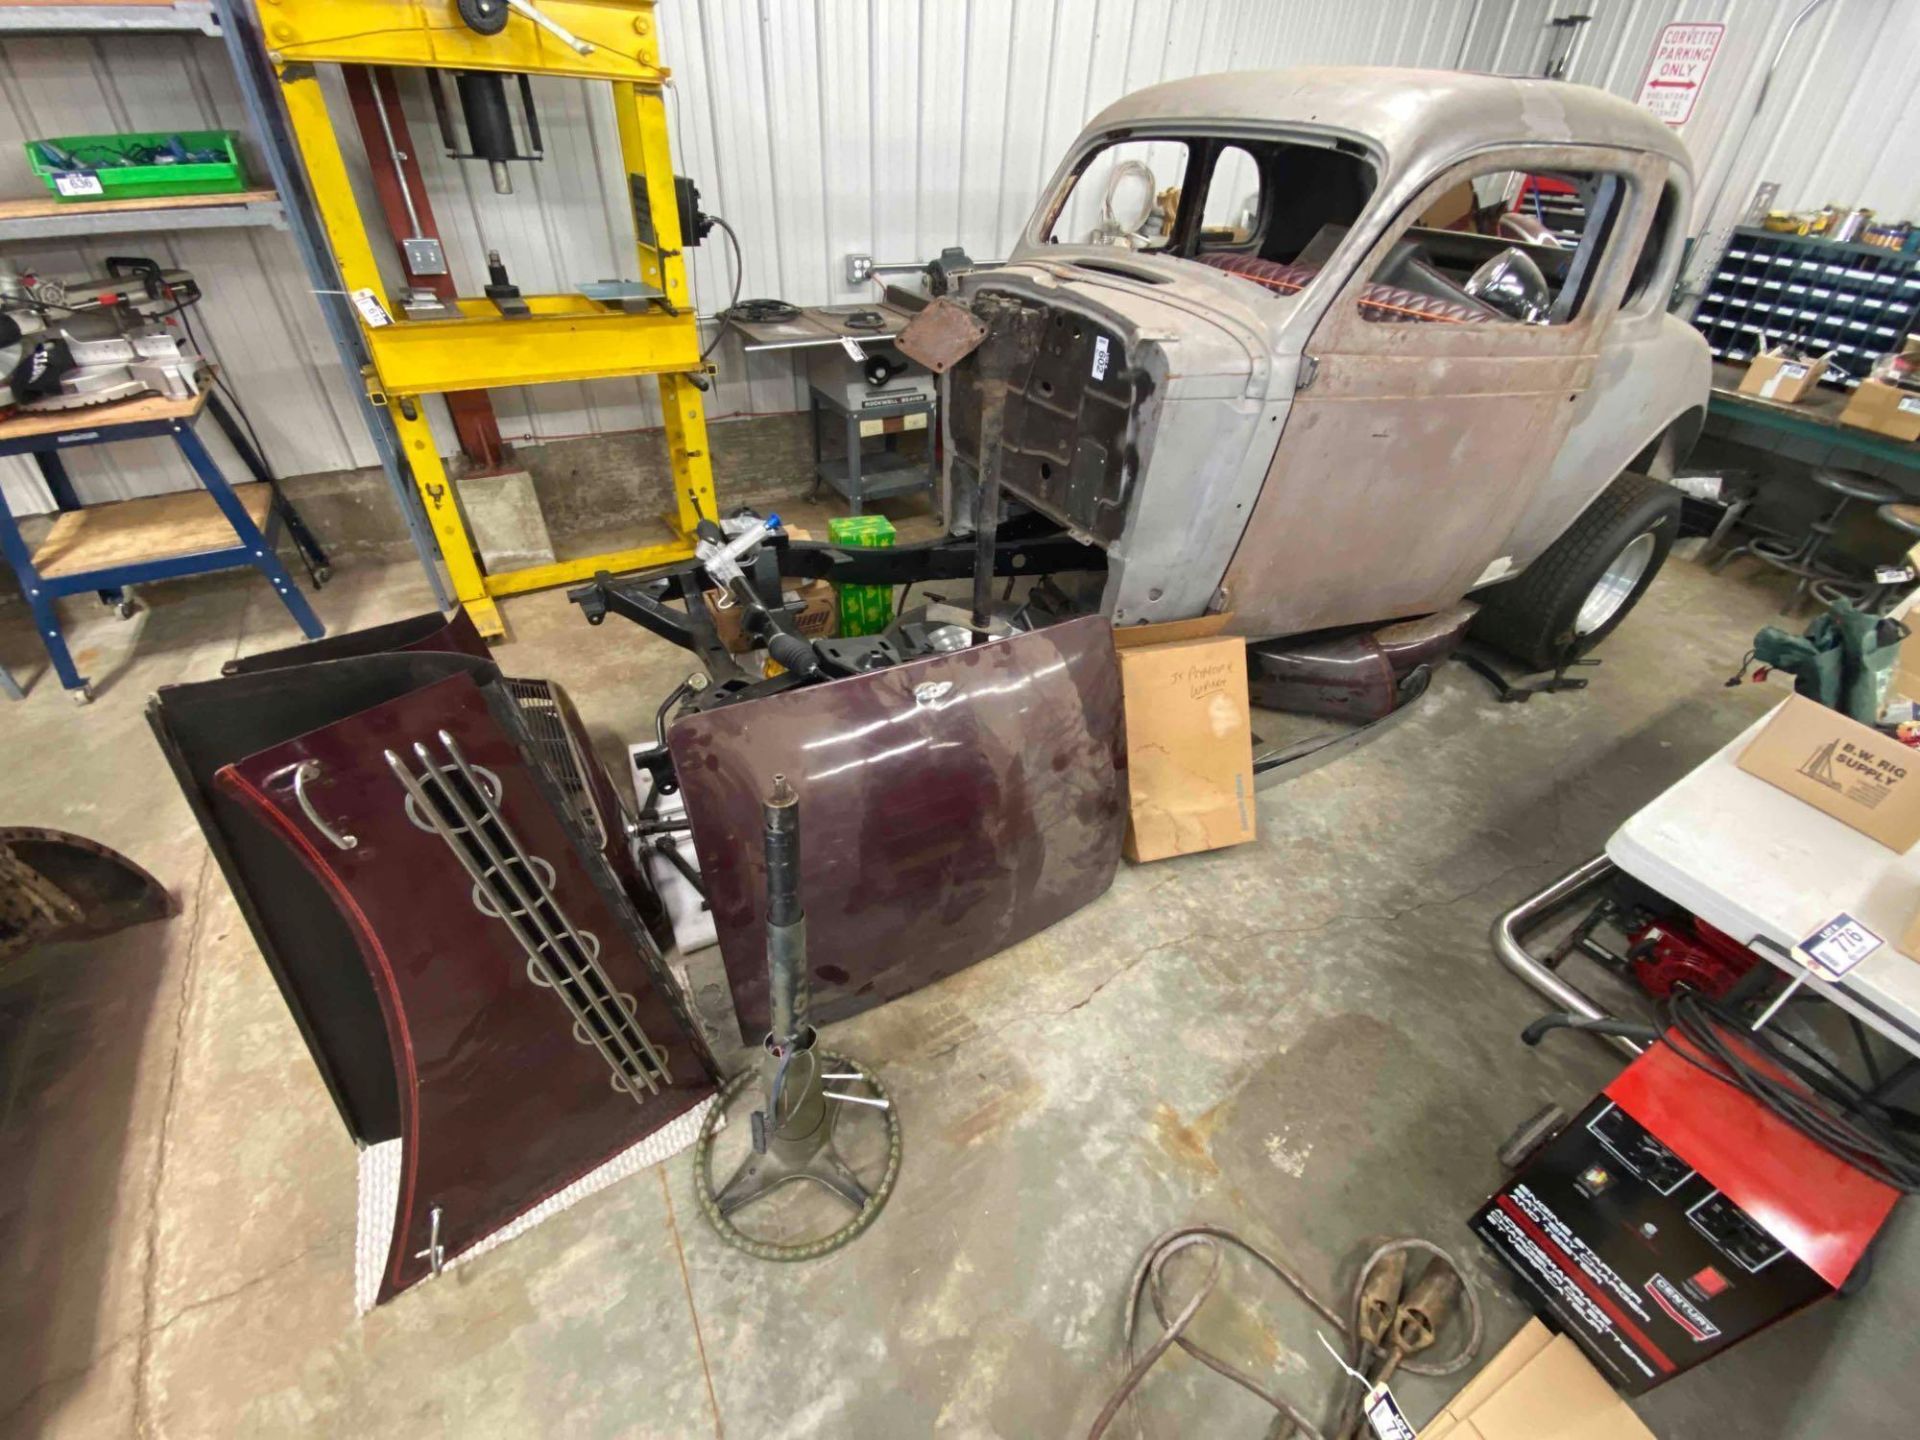 ’35 Plymouth Coupe Including Body Panels, Frame, Lights, etc. ***No Engine, Transmission, etc.*** - Image 2 of 16